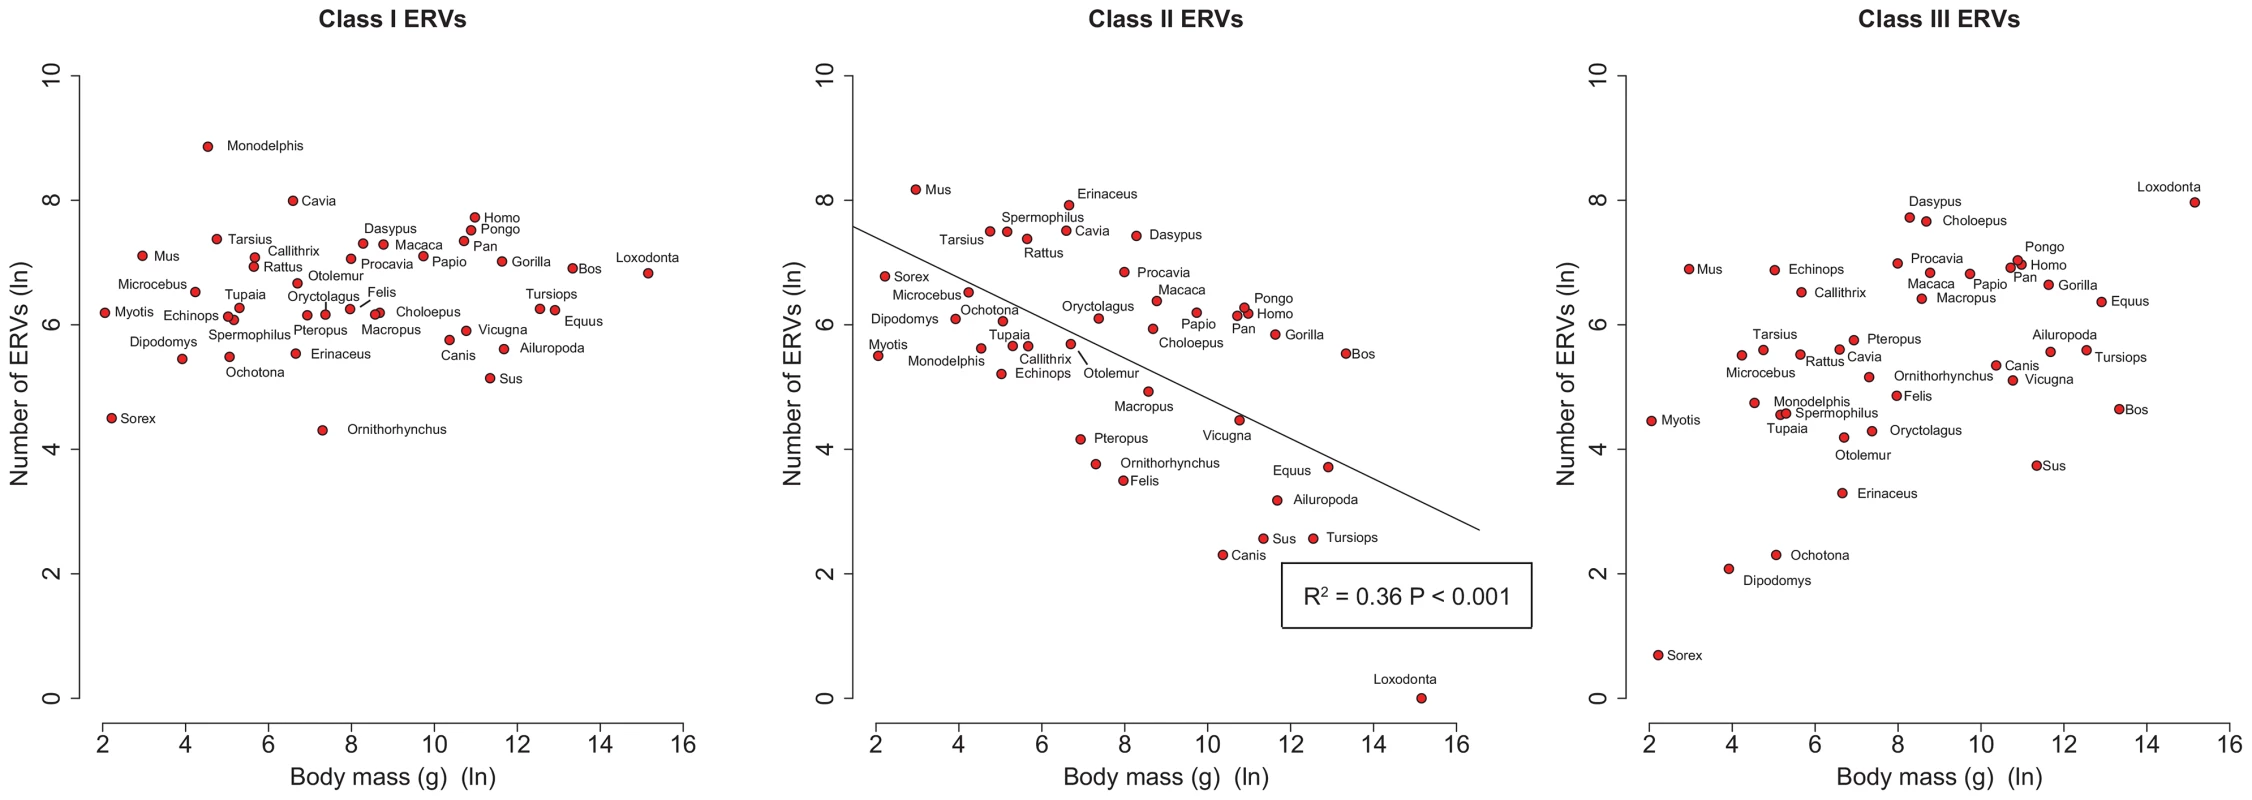 Correlations of number of ERVs against body mass (both log-transformed) by ERV class.